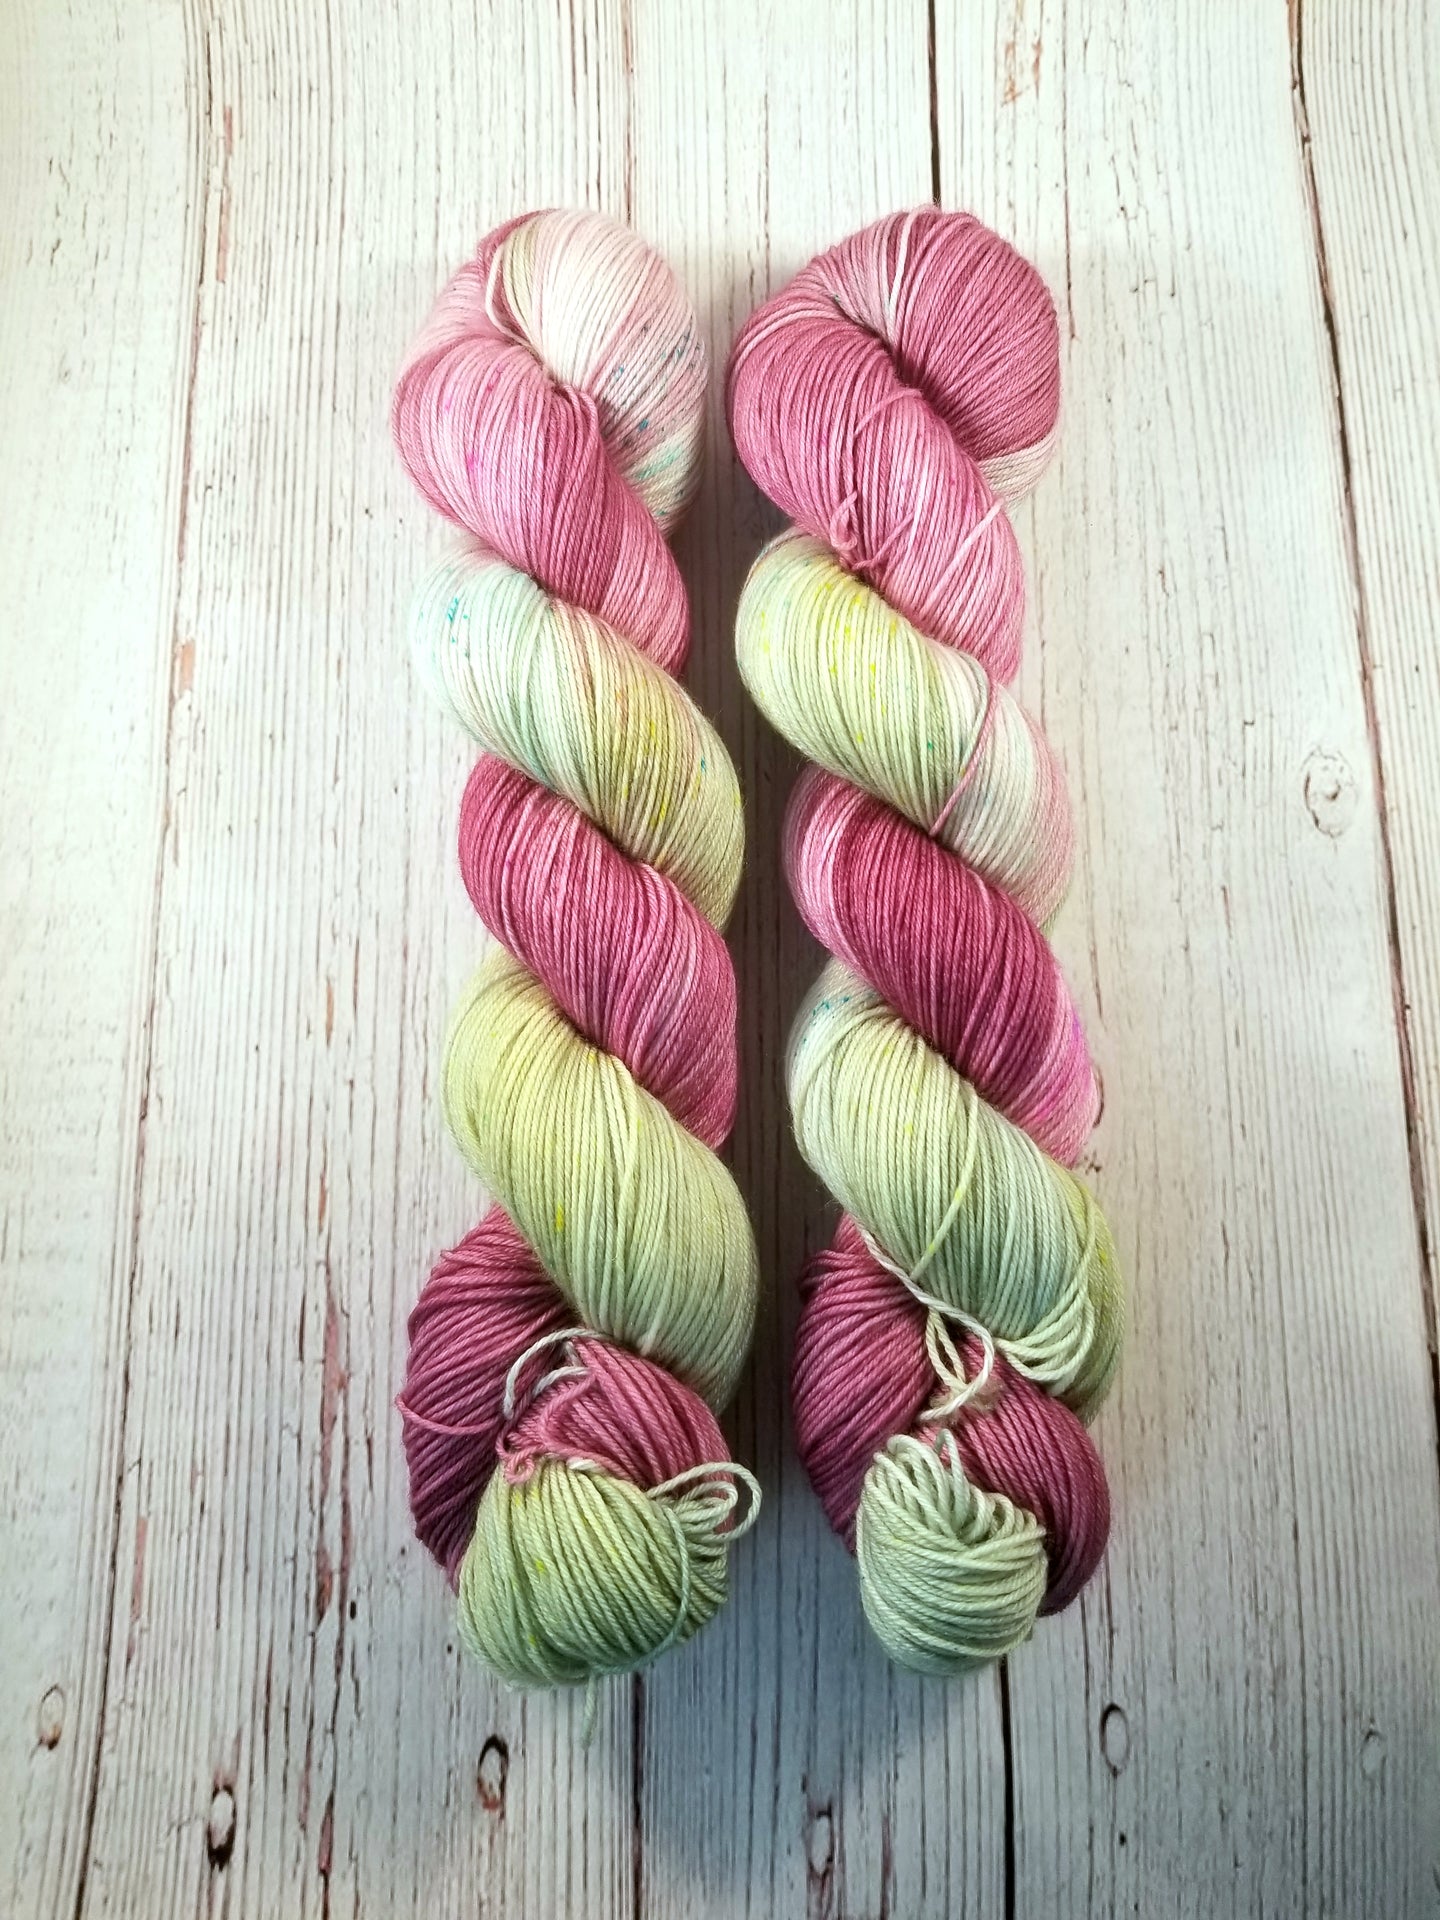 VKL Exclusive Colorway: Take A Turn In The Garden